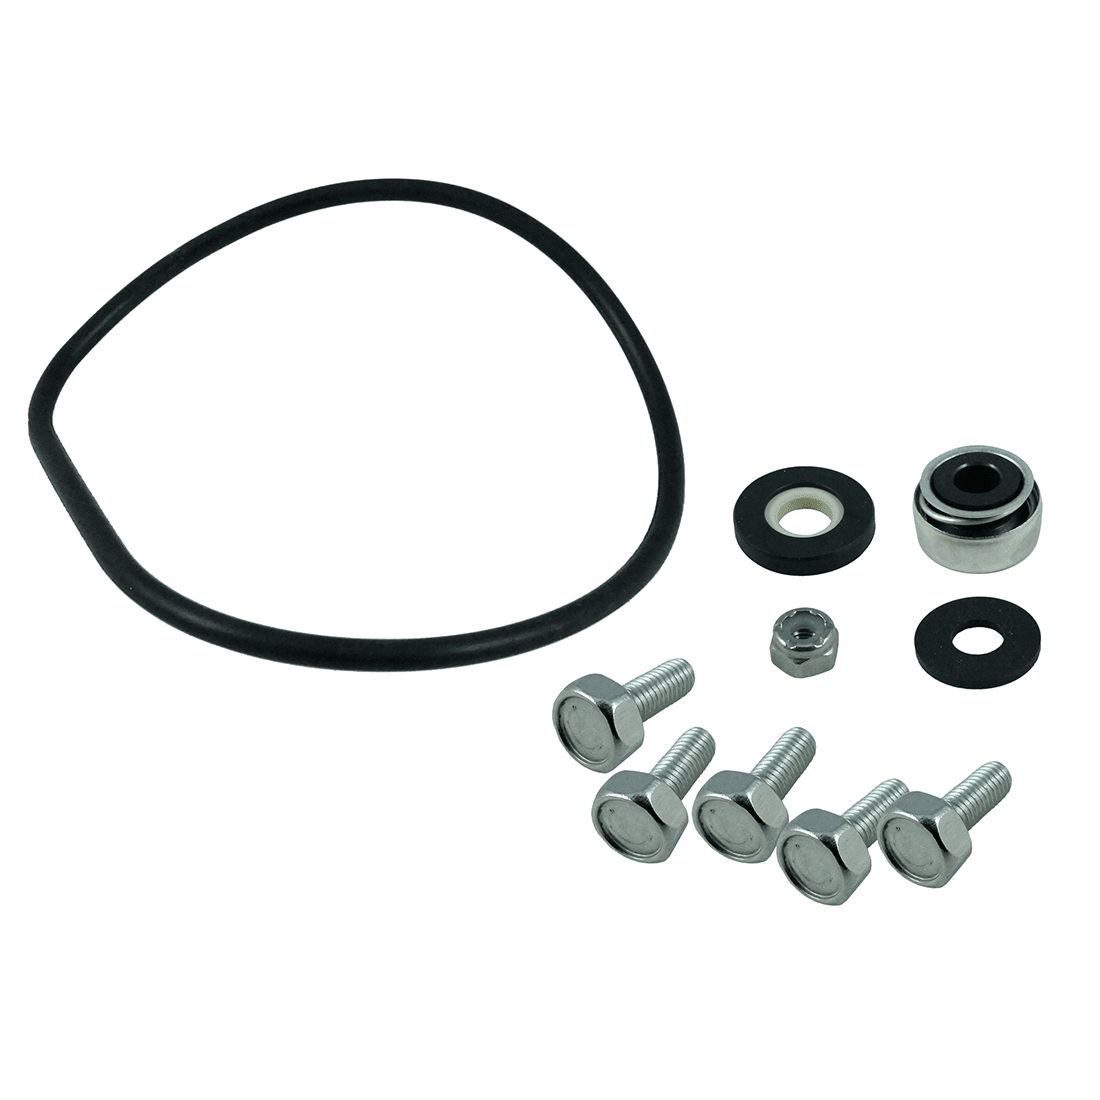 50835 of Jabsco Service Kit for 50840/50860 Cyclone Pumps